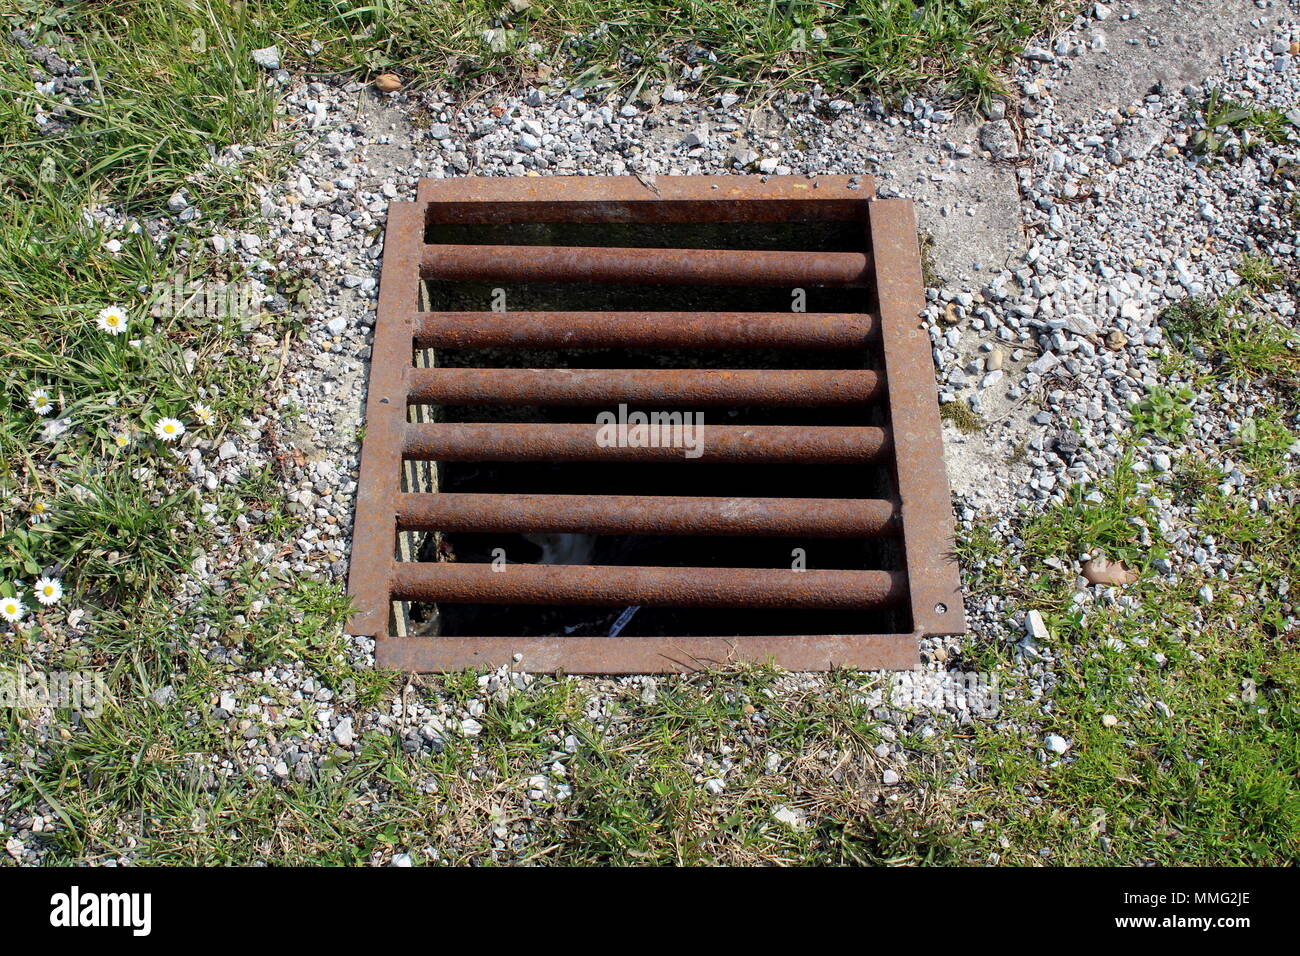 Storm drain with strong rusted metal bars connected to local sewage surrounded with uncut grass, small flowers and gravel Stock Photo